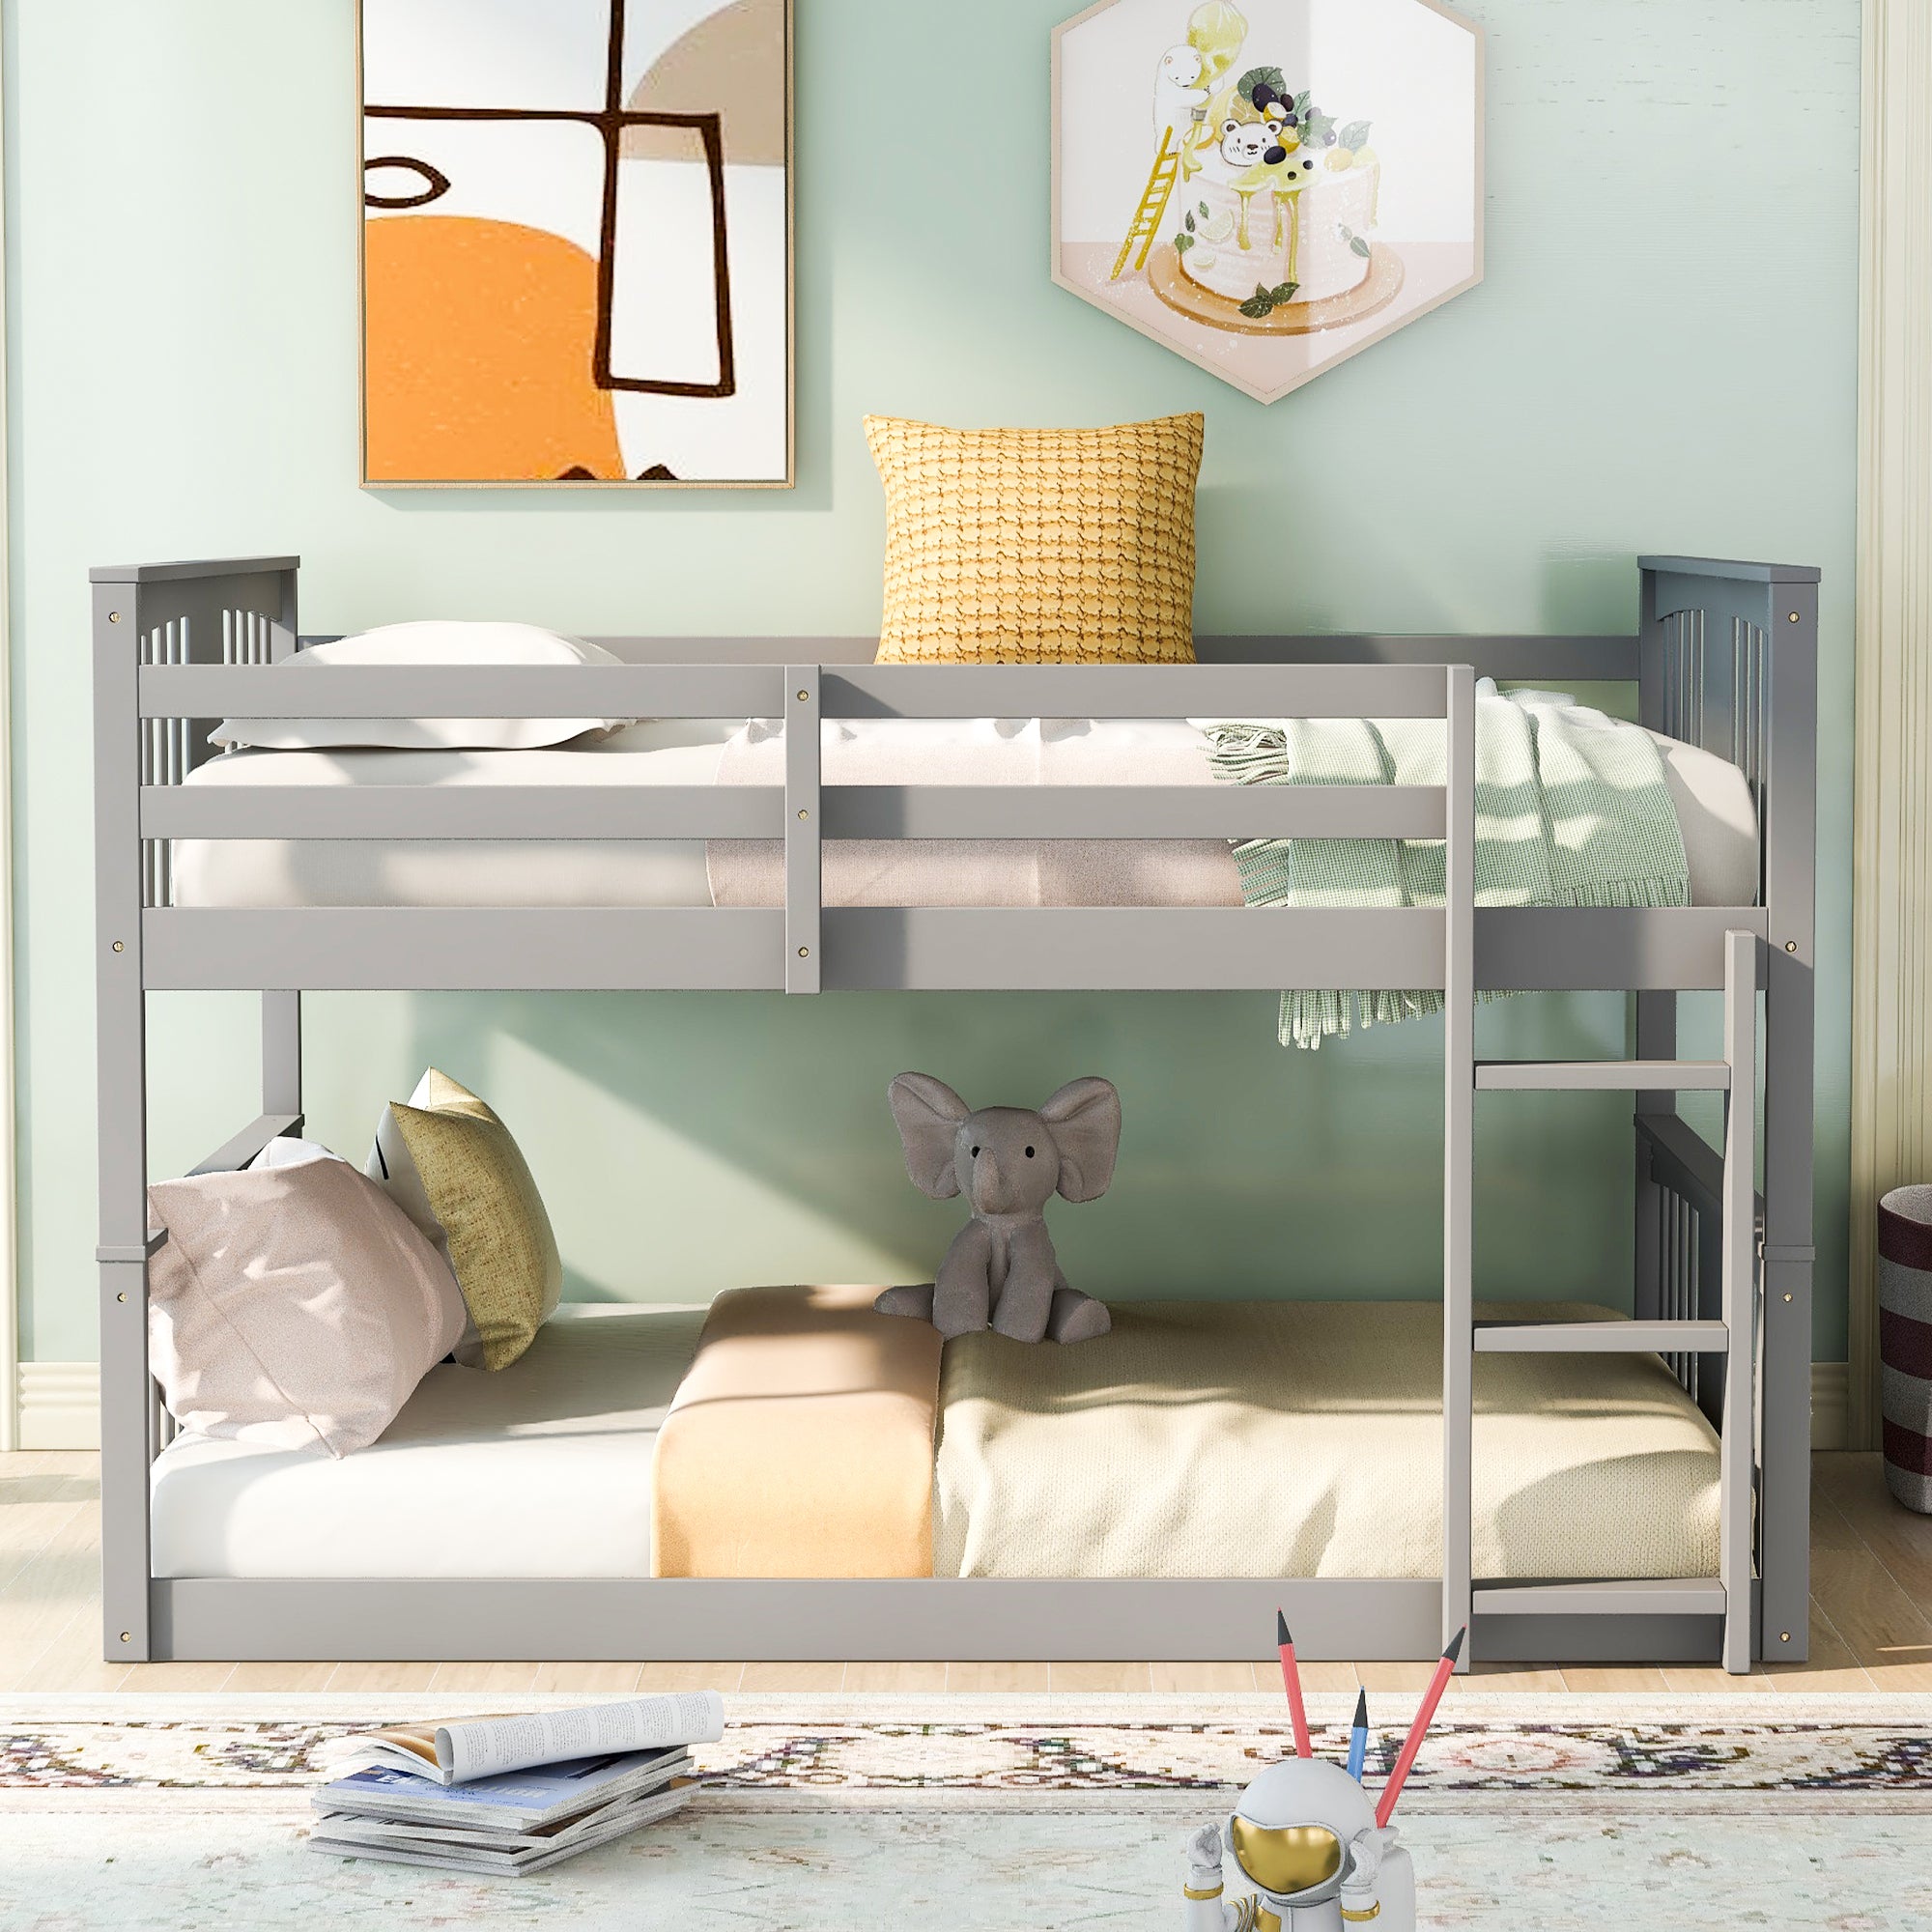 Full Over Full Bunk Bed with Ladder & Guardrail for Twins/Adults, Wood Full Szie Bunk Bed for Bedroom, Gray